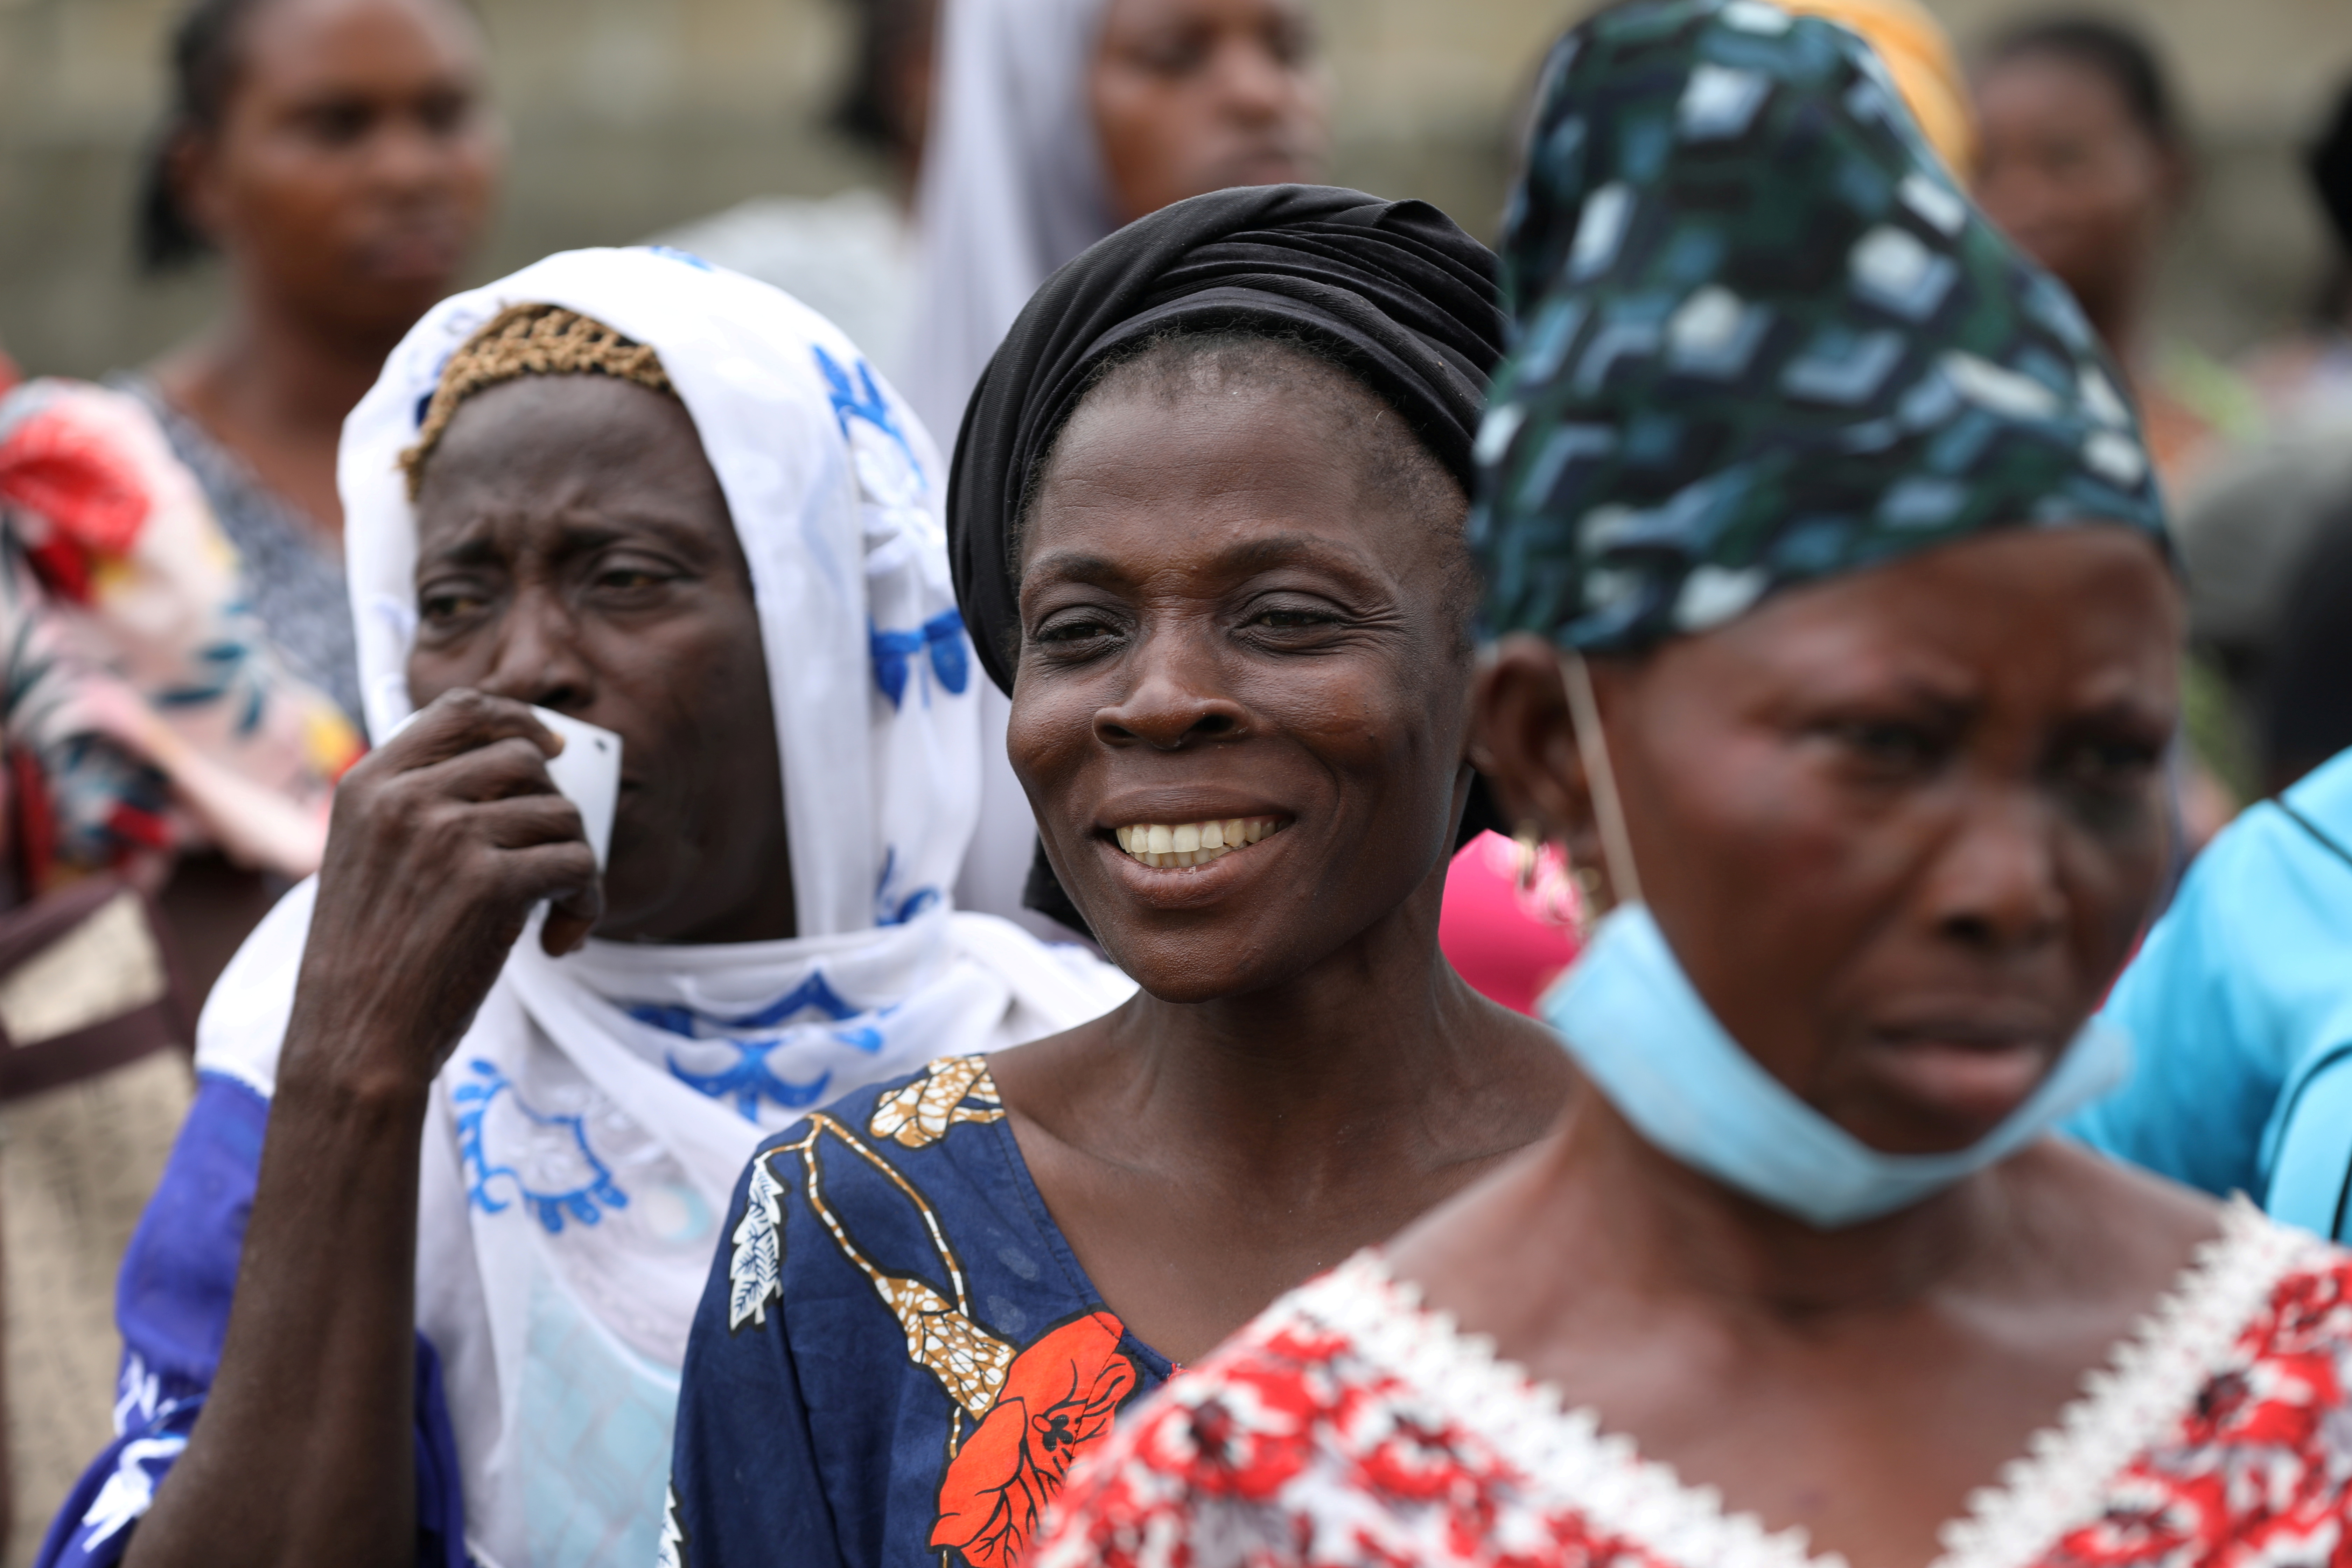 Women queue for food parcels during distribution by volunteers of the Lagos food bank initiative in a community in Oworoshoki, Lagos